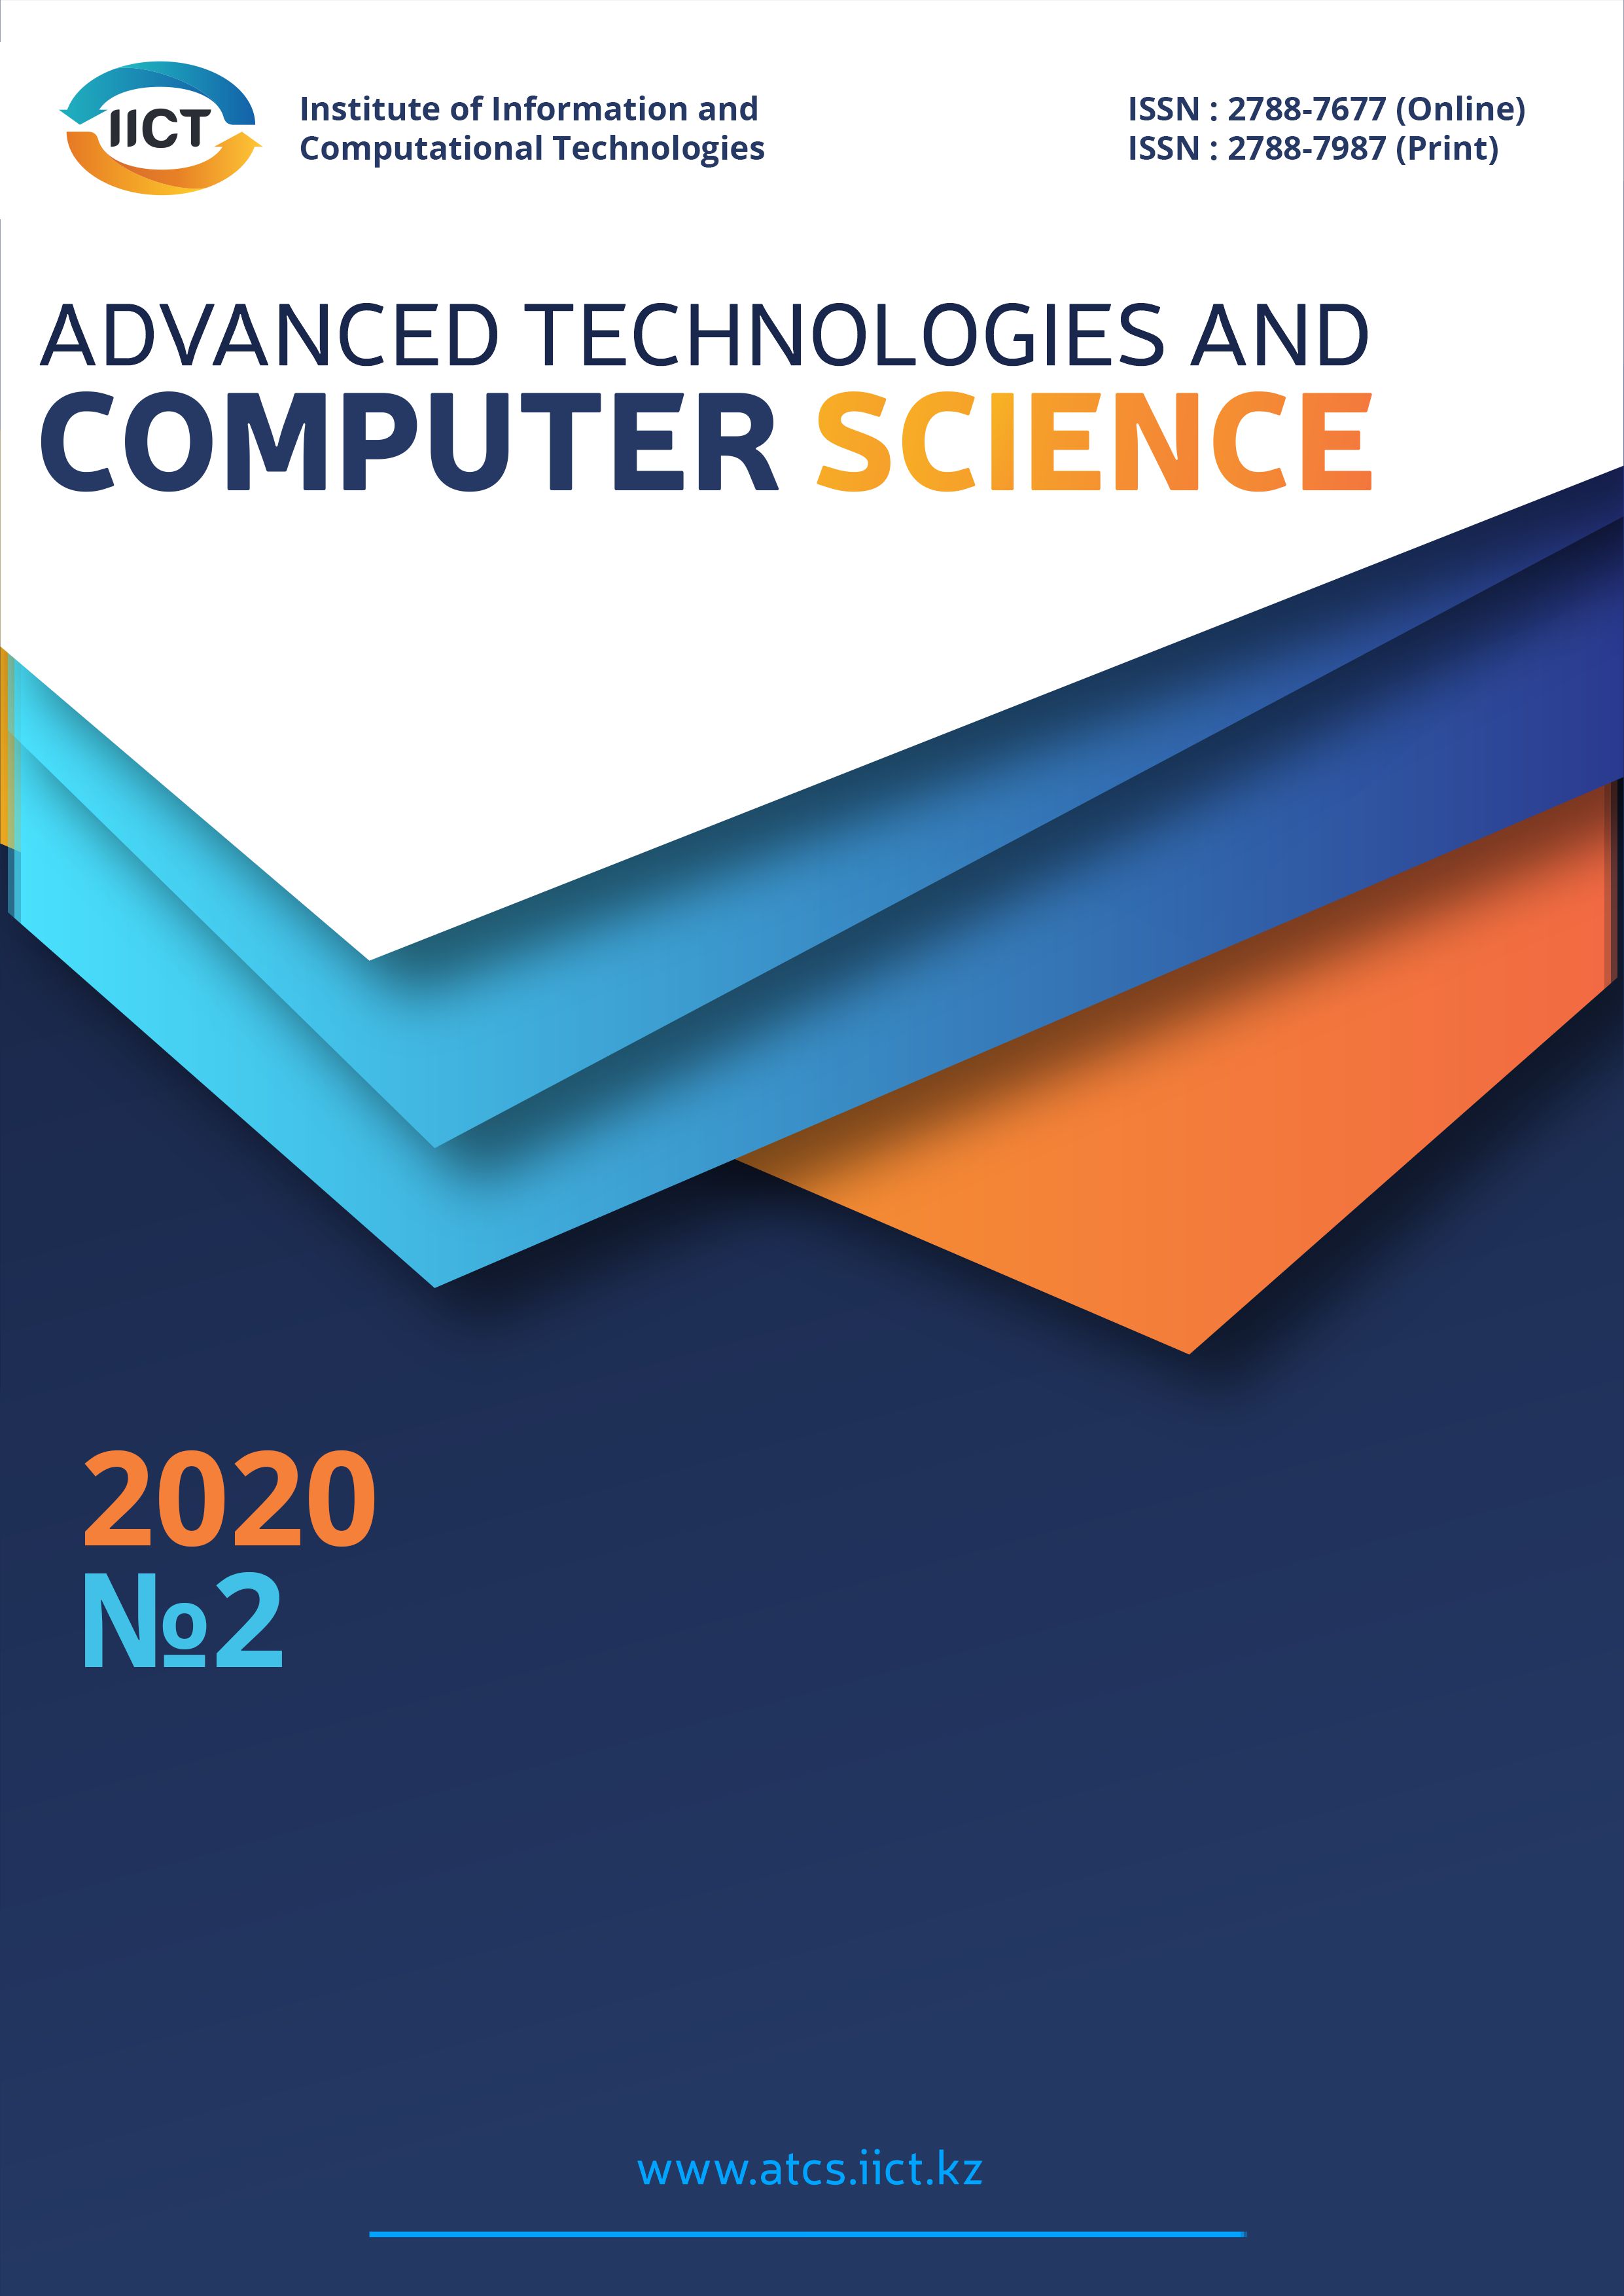 					View No. 2 (2020): Advanced technologies and computer science
				